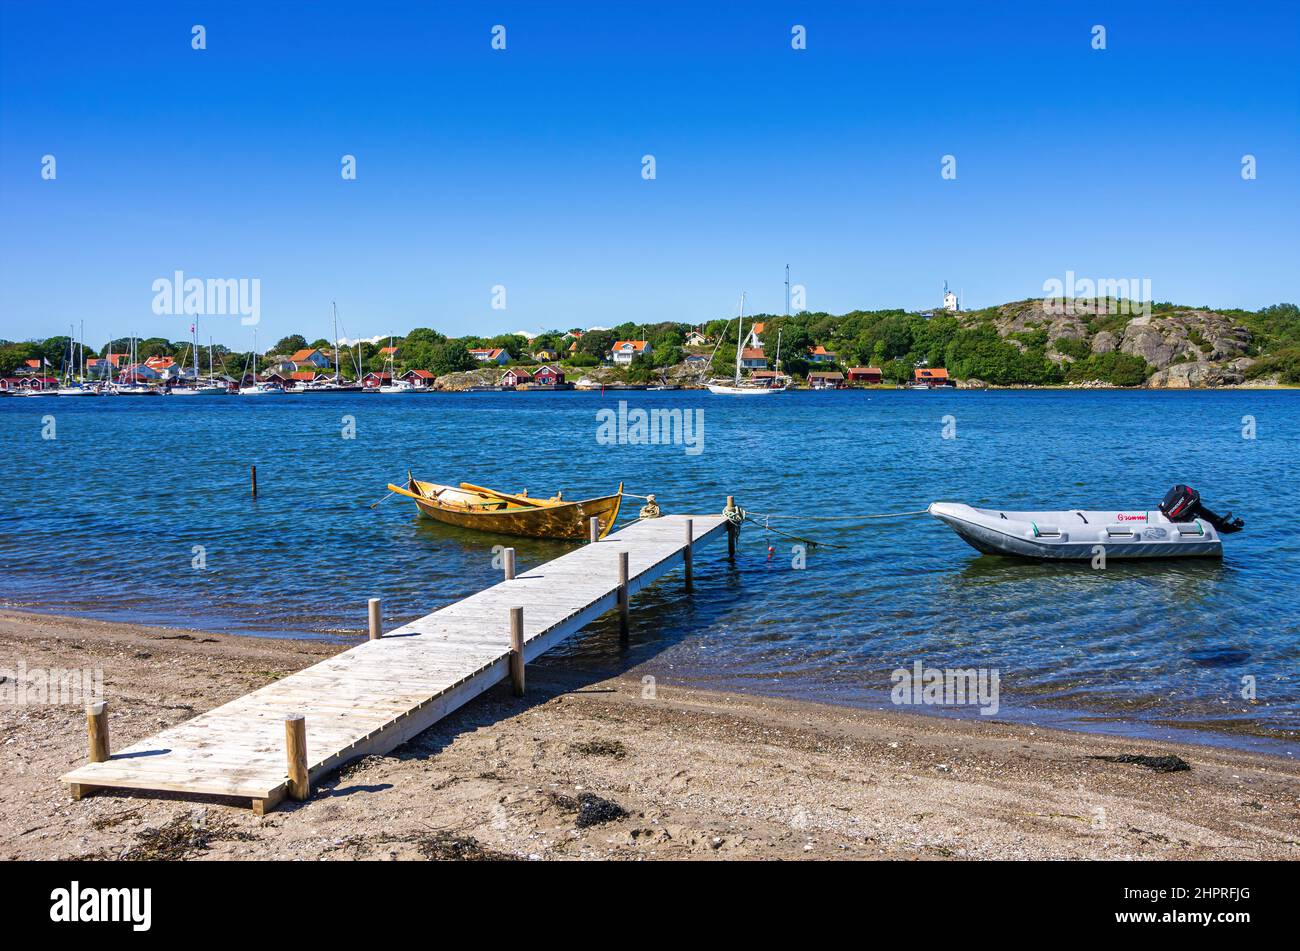 Two boats at a landing stage on the North shore of the South Koster Island with a beautiful view of the North Koster Island, Sweden. Stock Photo